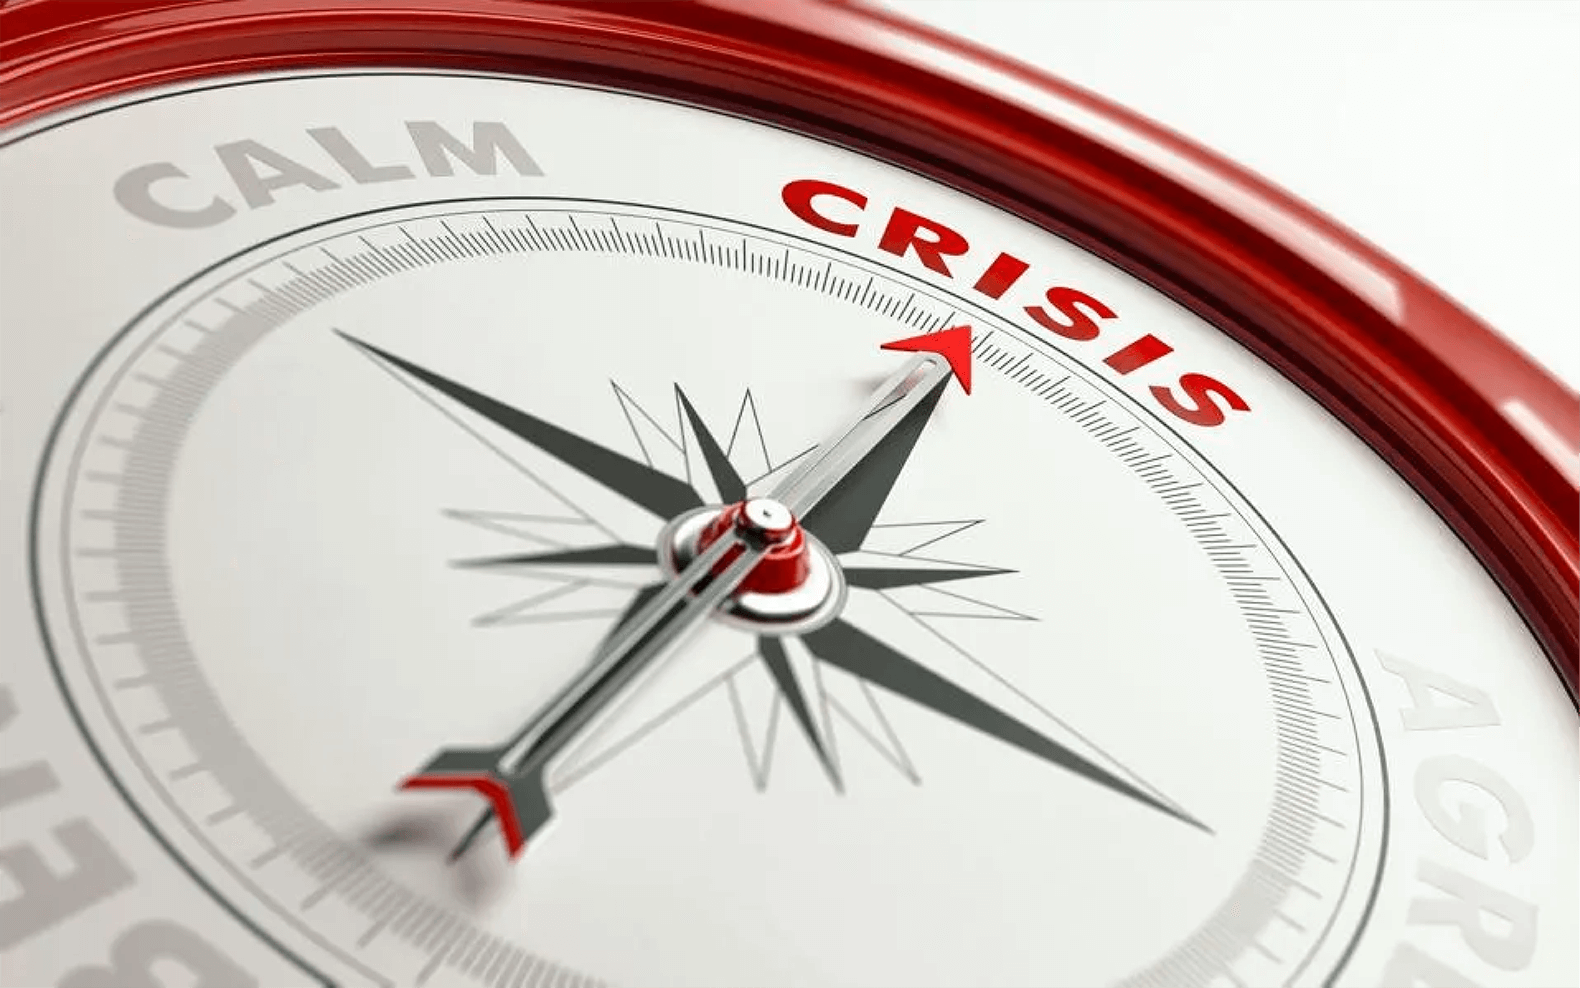 Leadership Styles Significantly Impact Crisis Communication